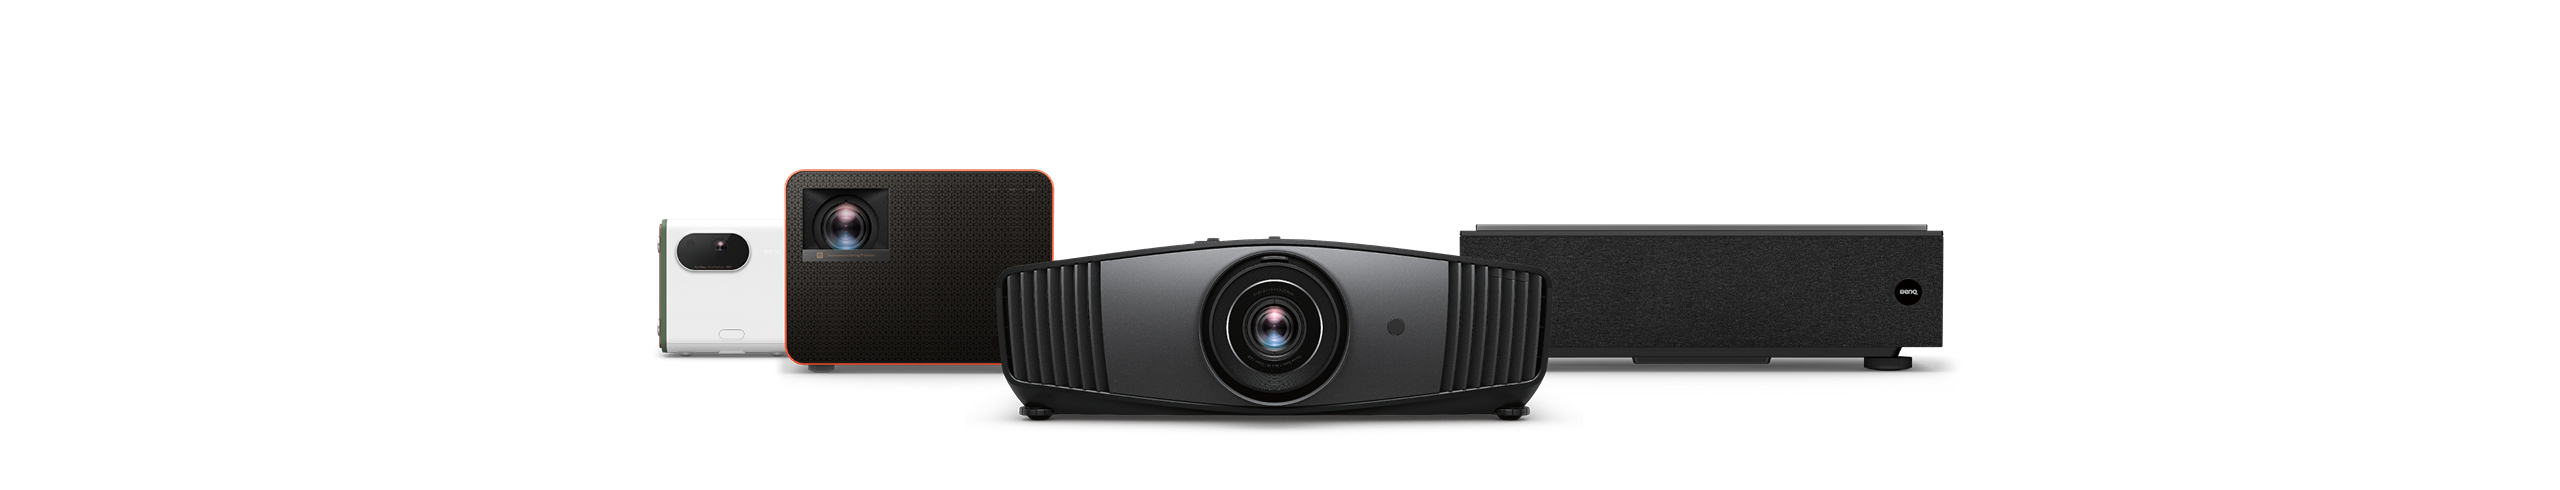 BenQ Projectors for All Spaces and Uses